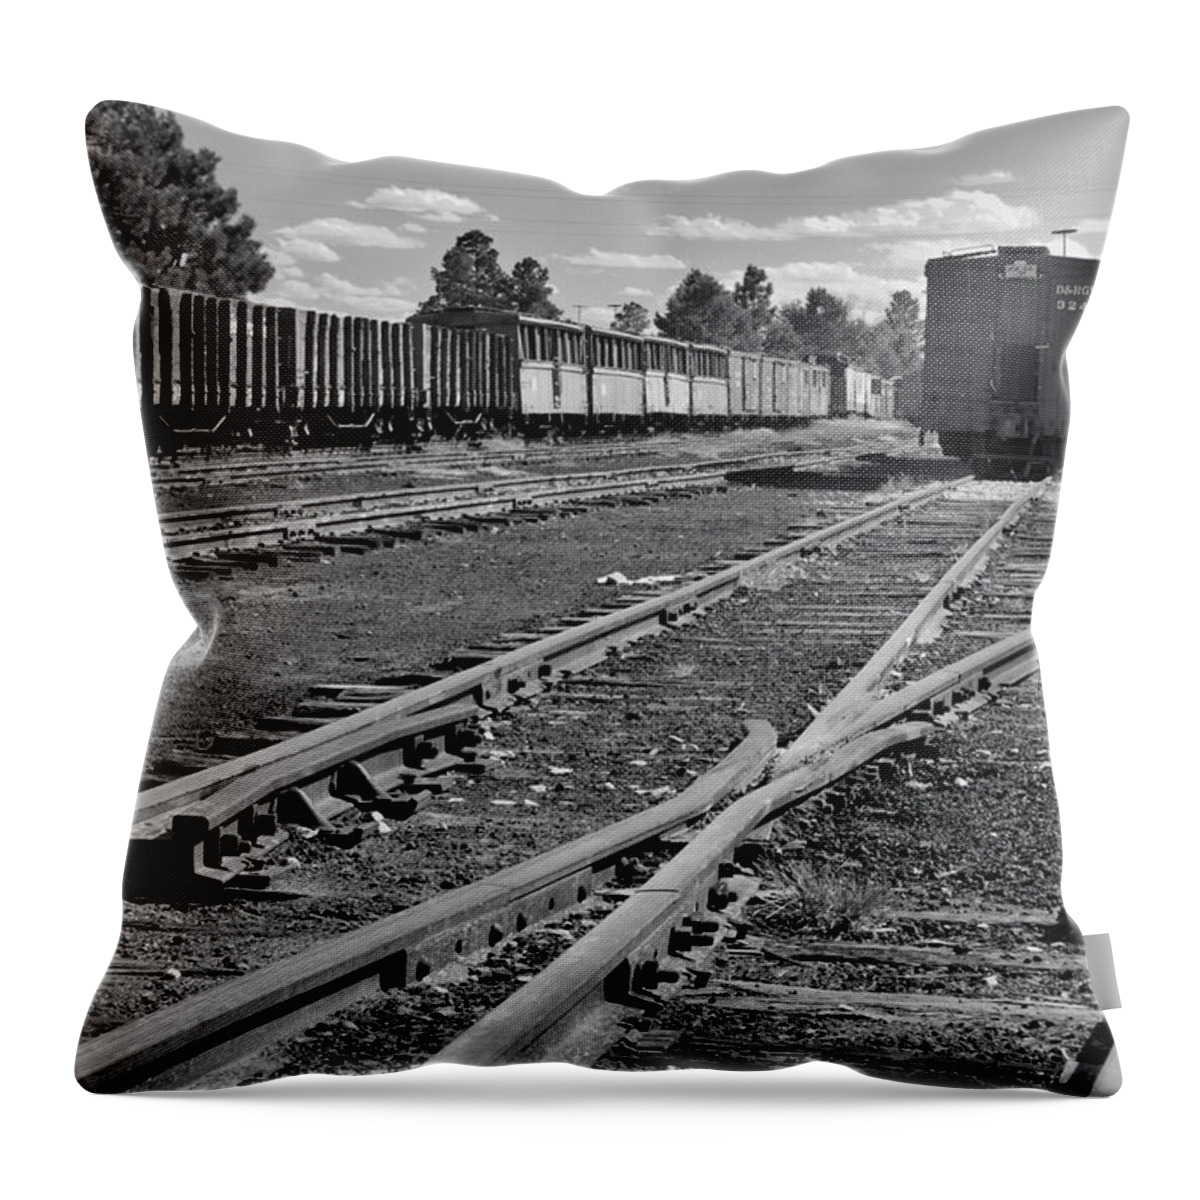 Trains Throw Pillow featuring the photograph The Yard by Ron Cline